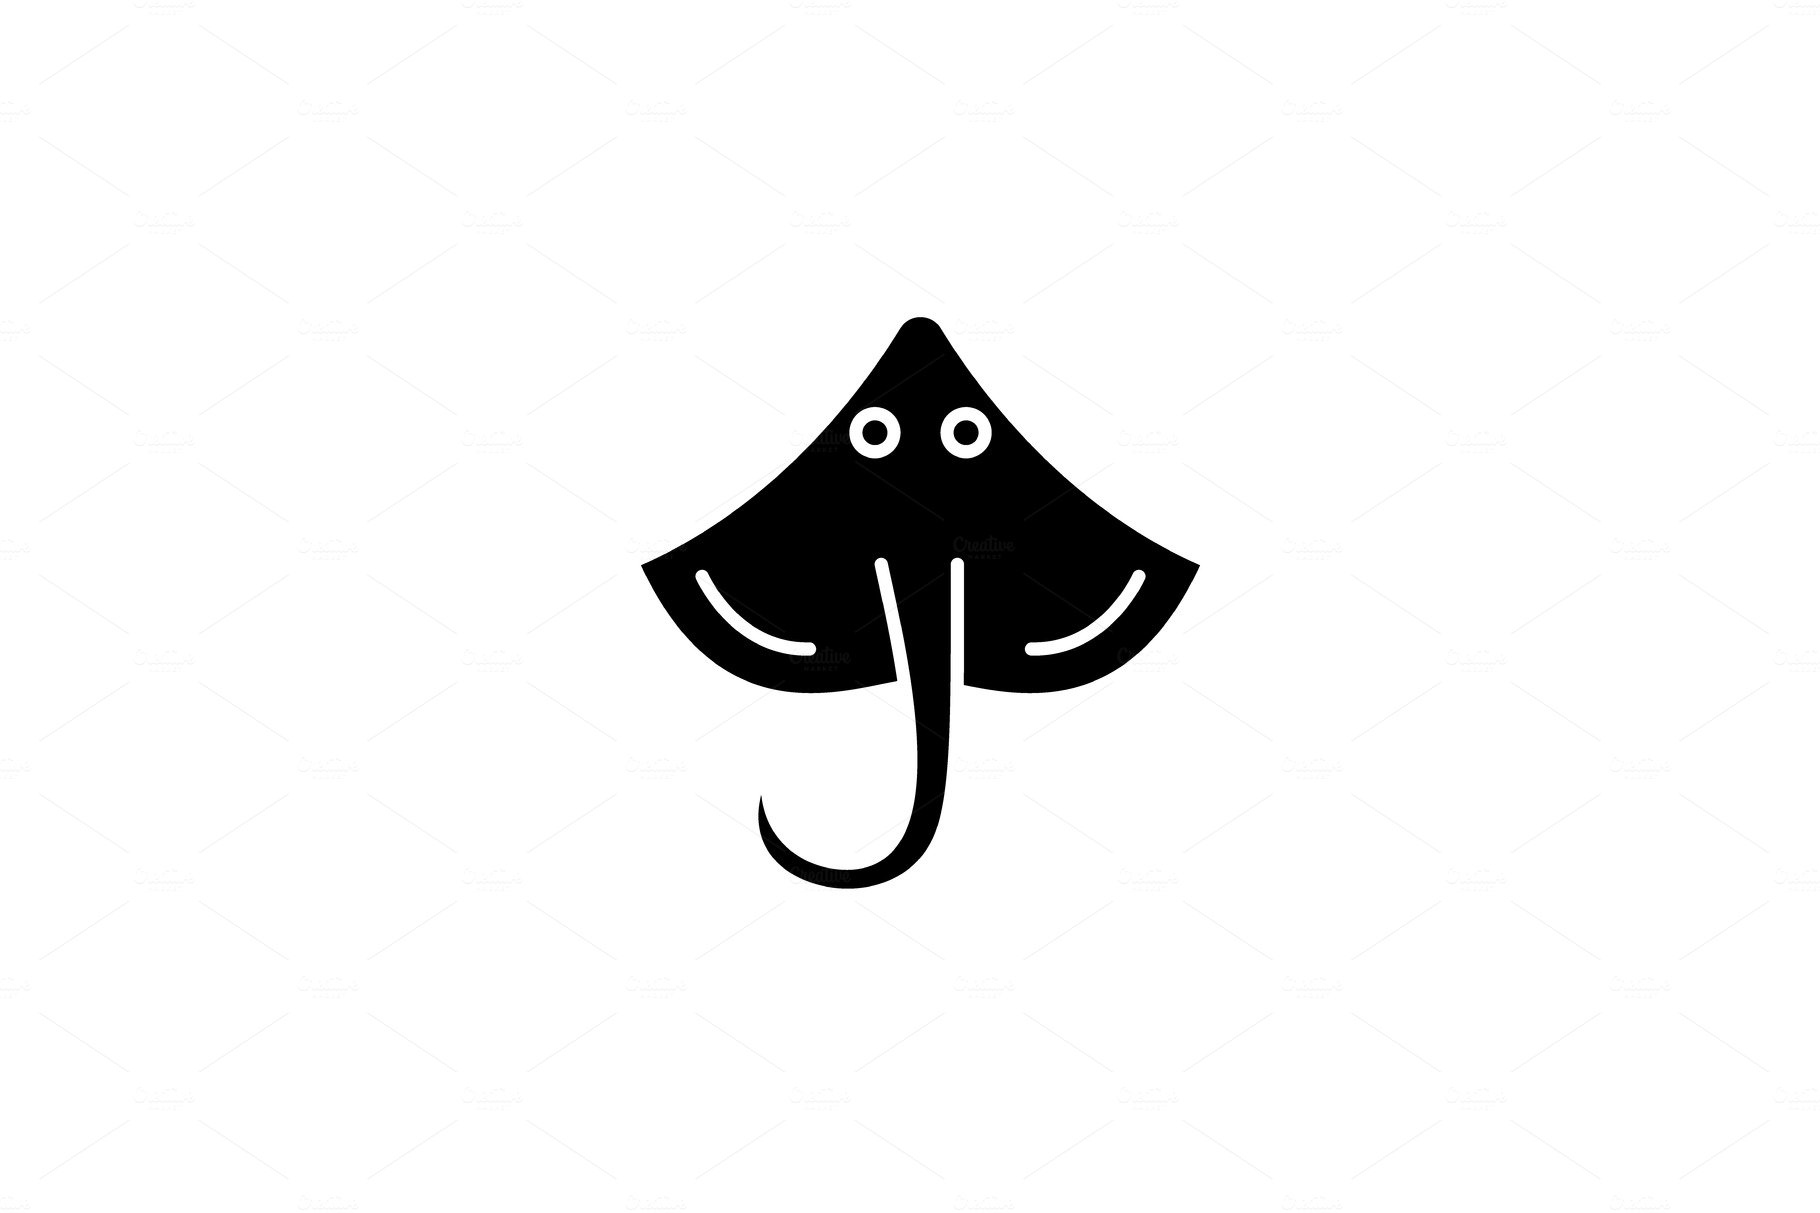 Stingray black icon, vector sign on cover image.